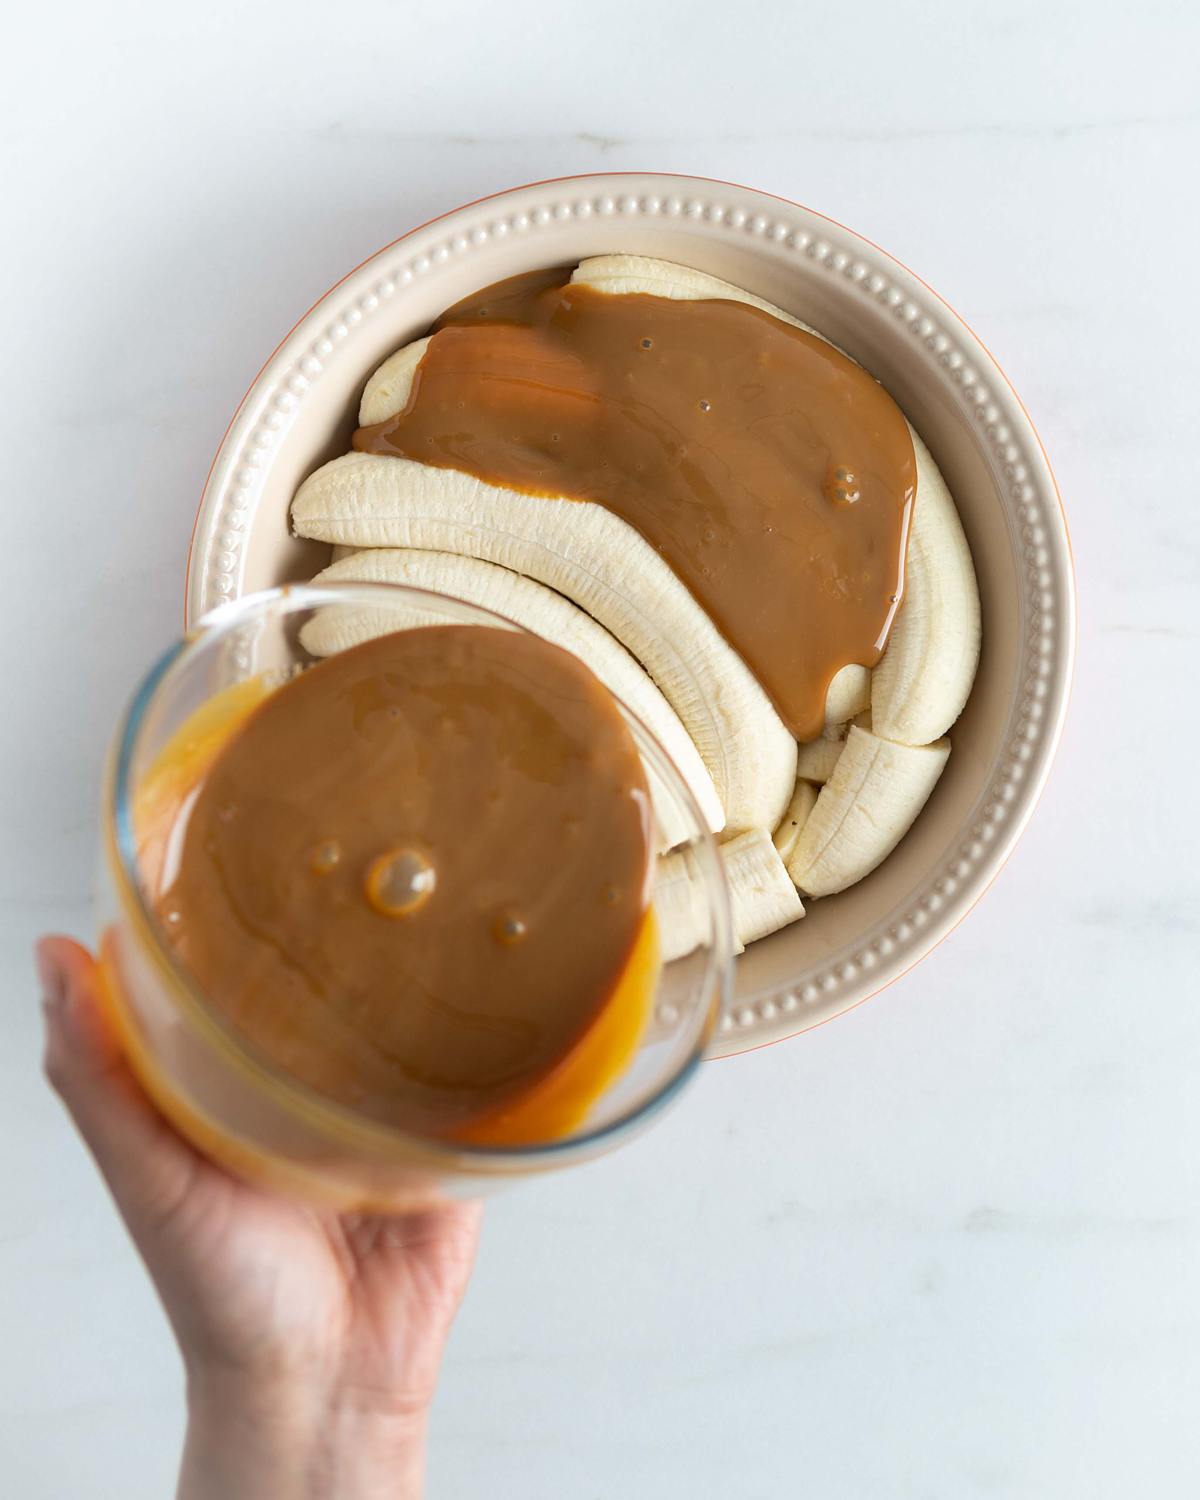 Spread the caramel evenly over the bananas, covering completely. Recipe by movers and bakers